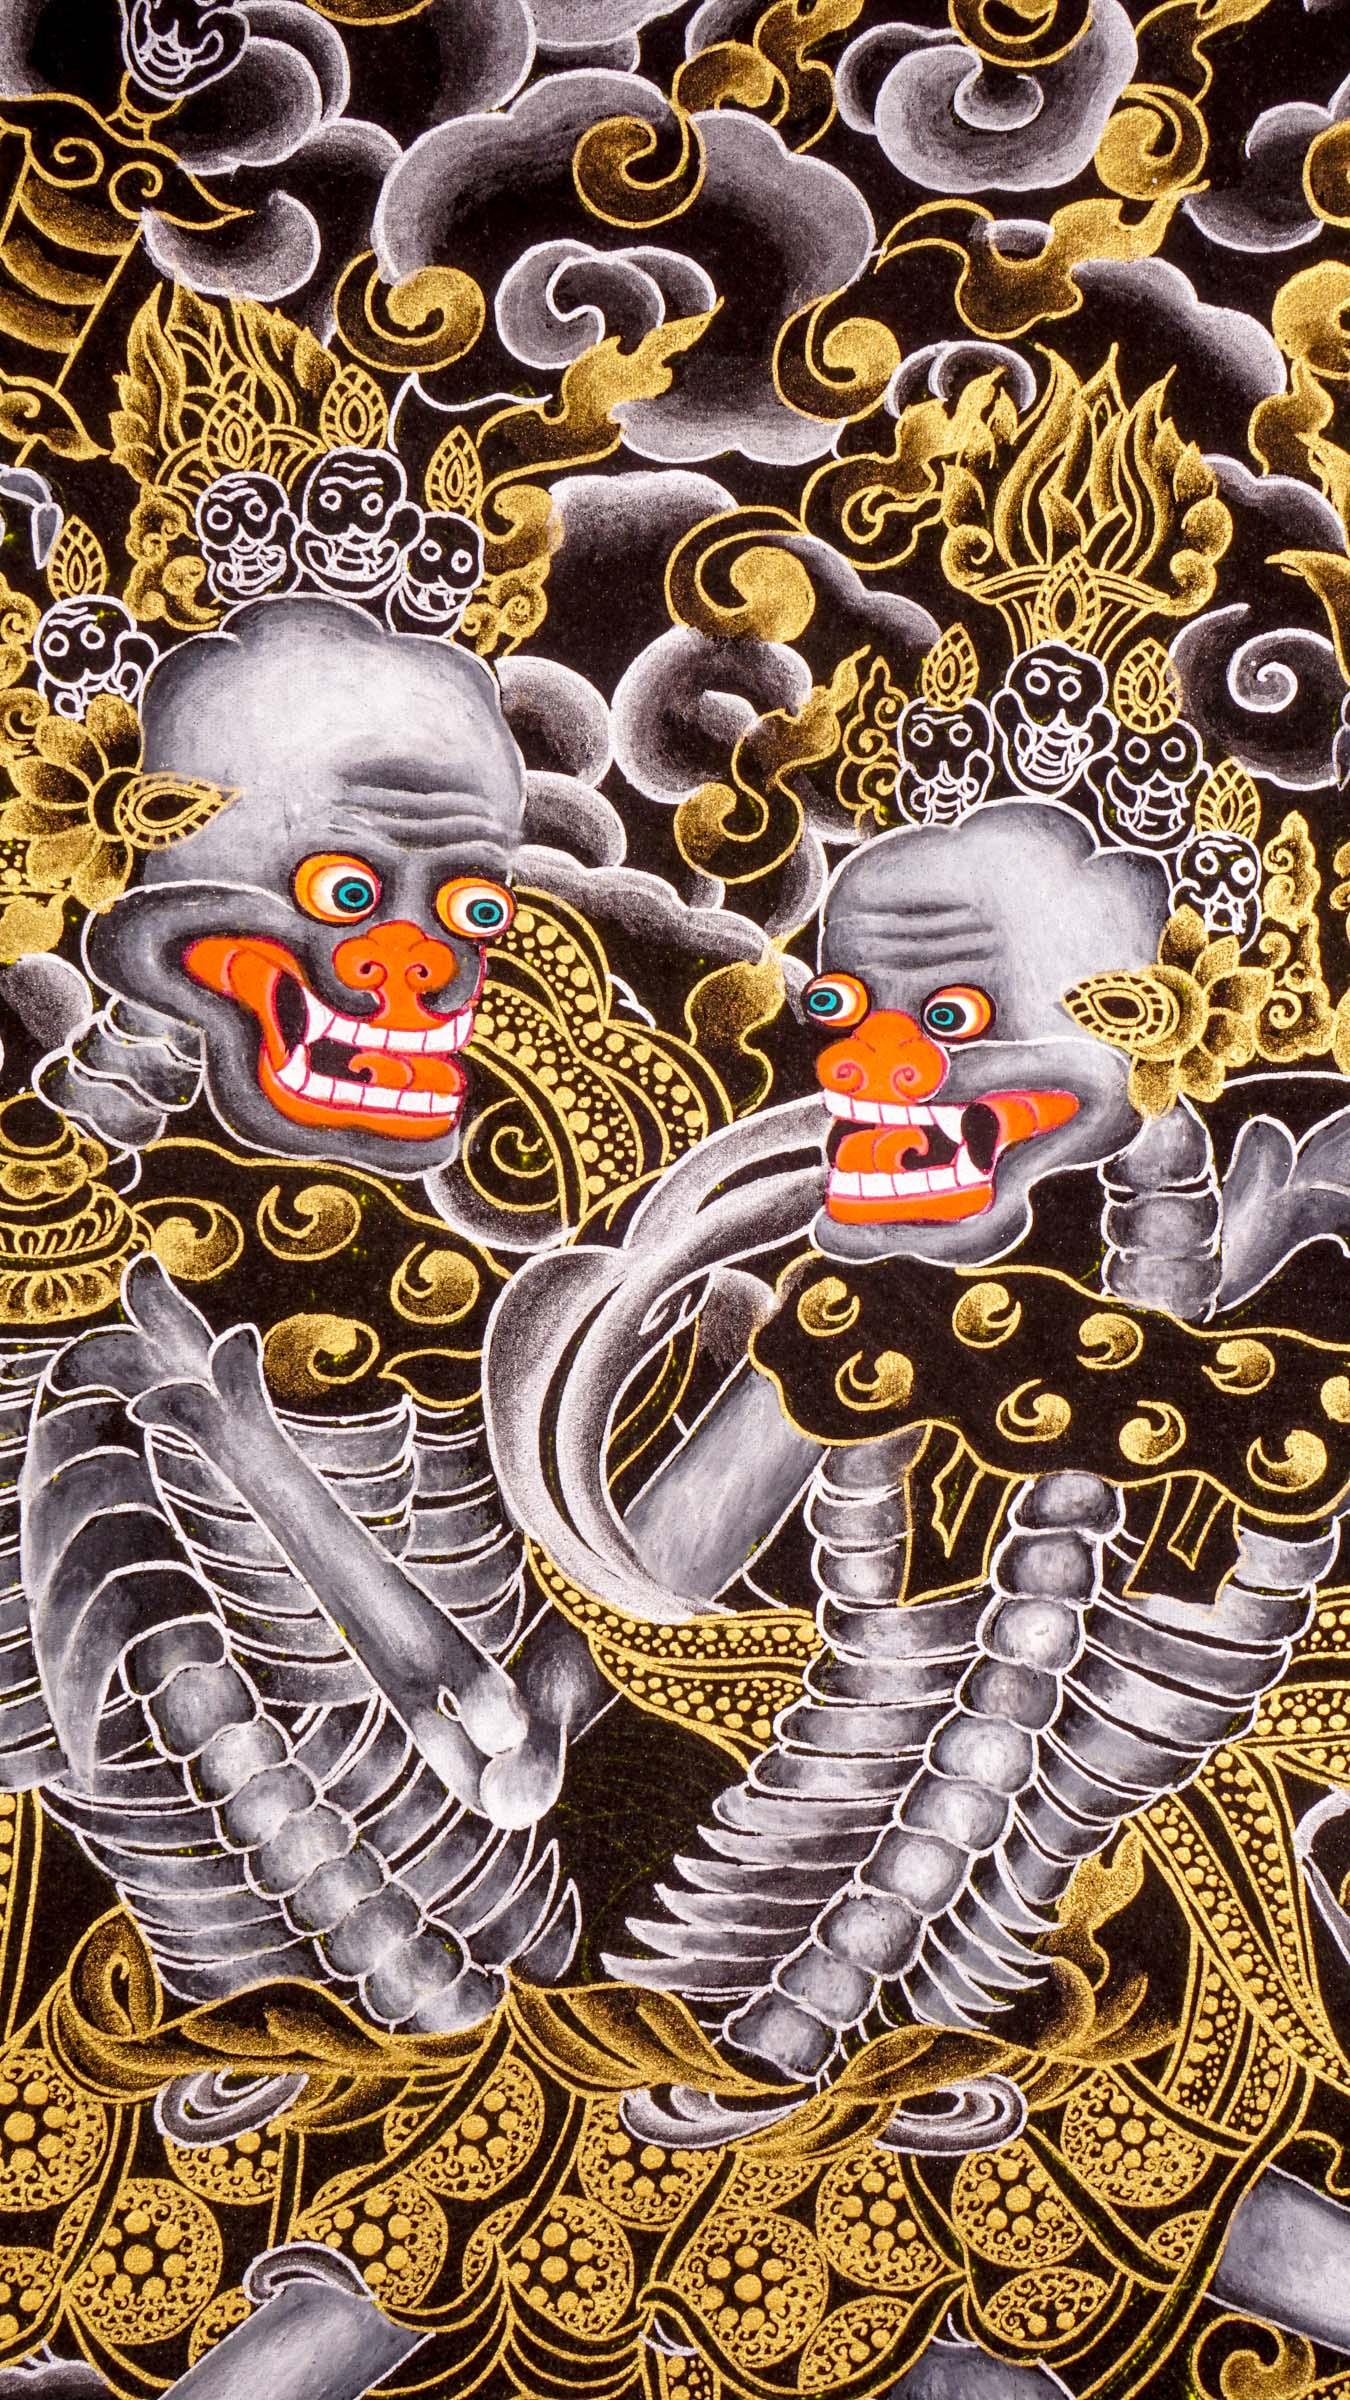 Citapati (two skeletons) tibetan thangak art depicts the 2 meditator who was killed during the meditation and became the ferocious enemy of the thief who killed them.